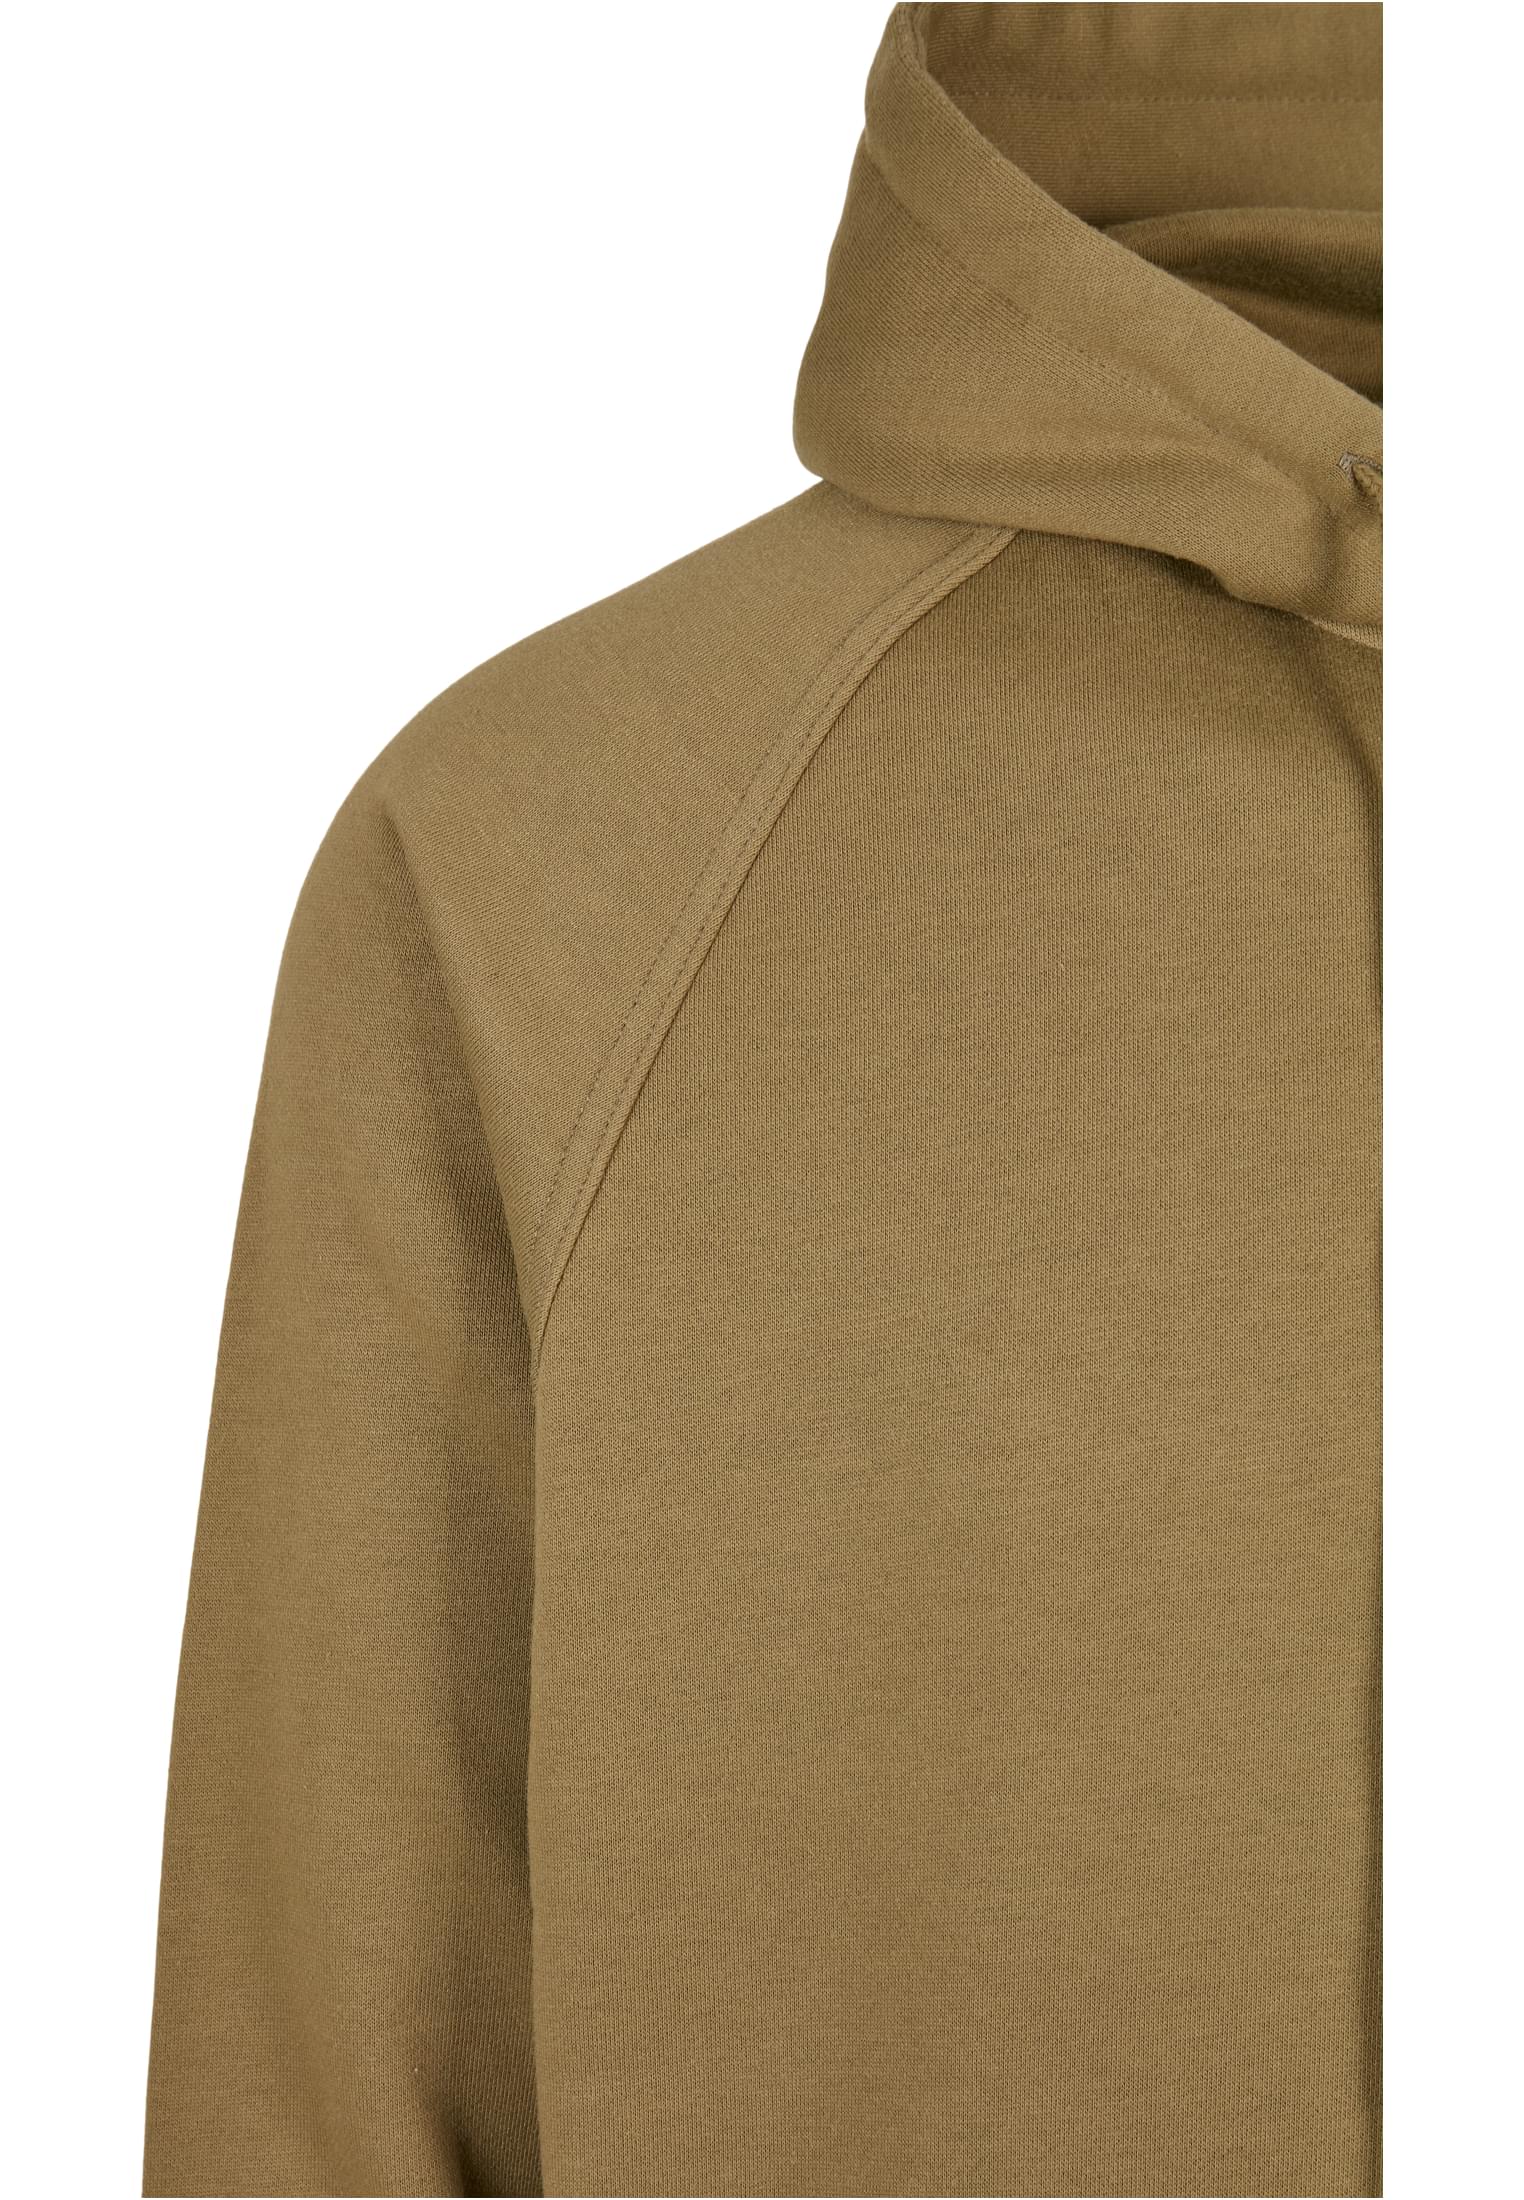 Plus Size Blank Hoody in Farbe tiniolive